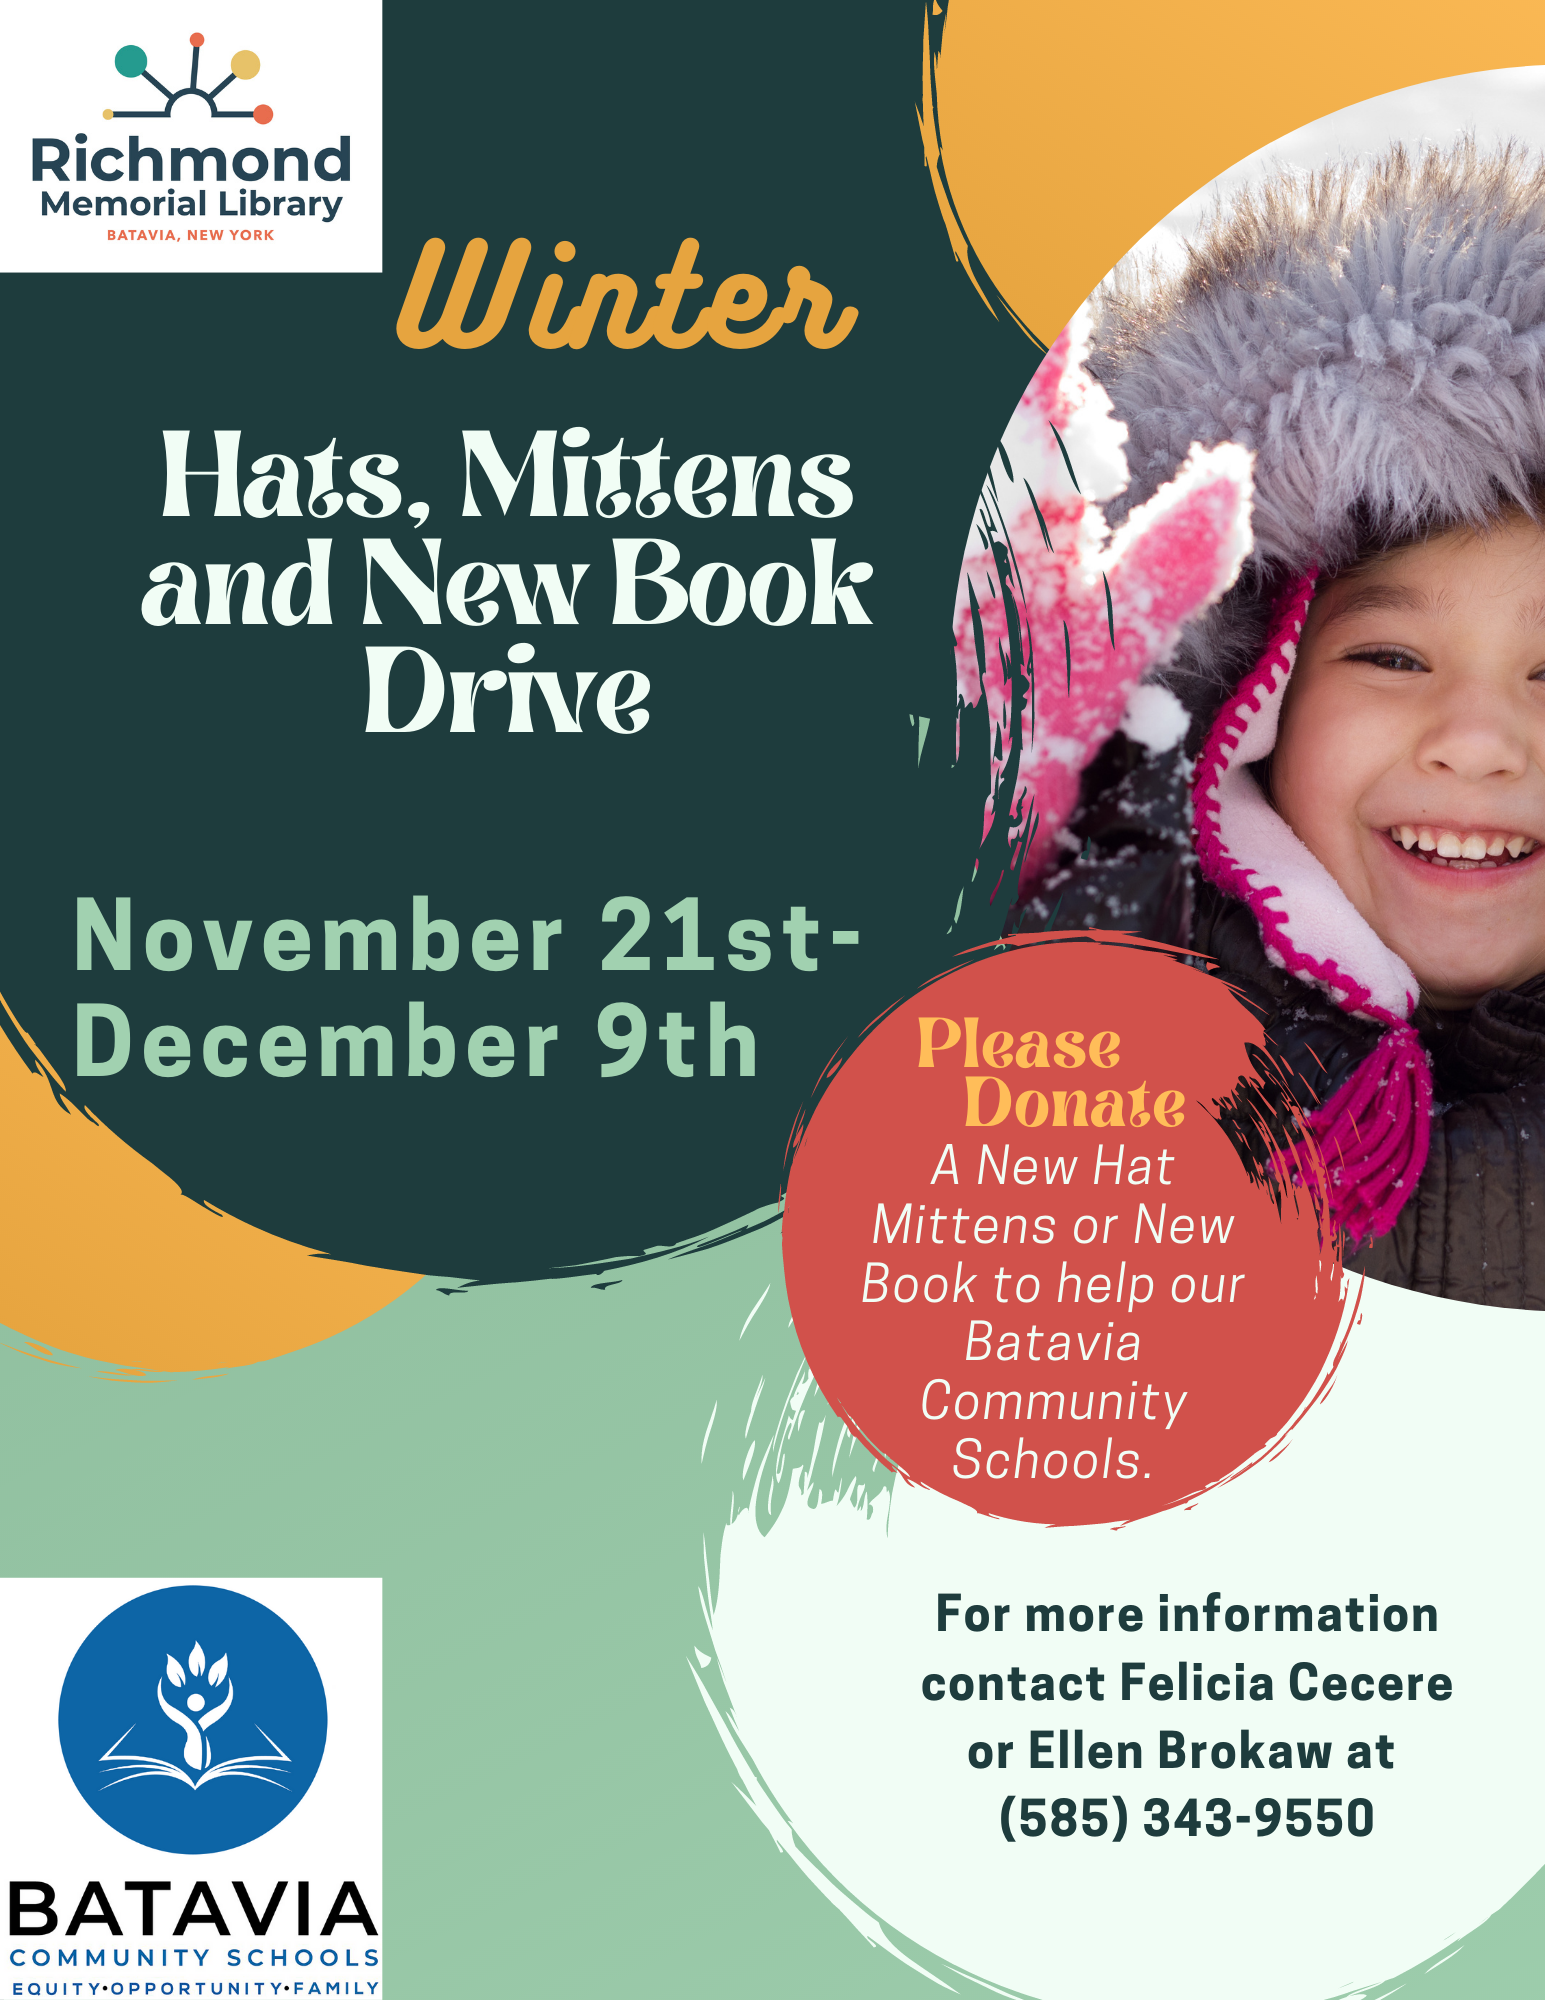 New Hats, Mittens & New Book Drive 